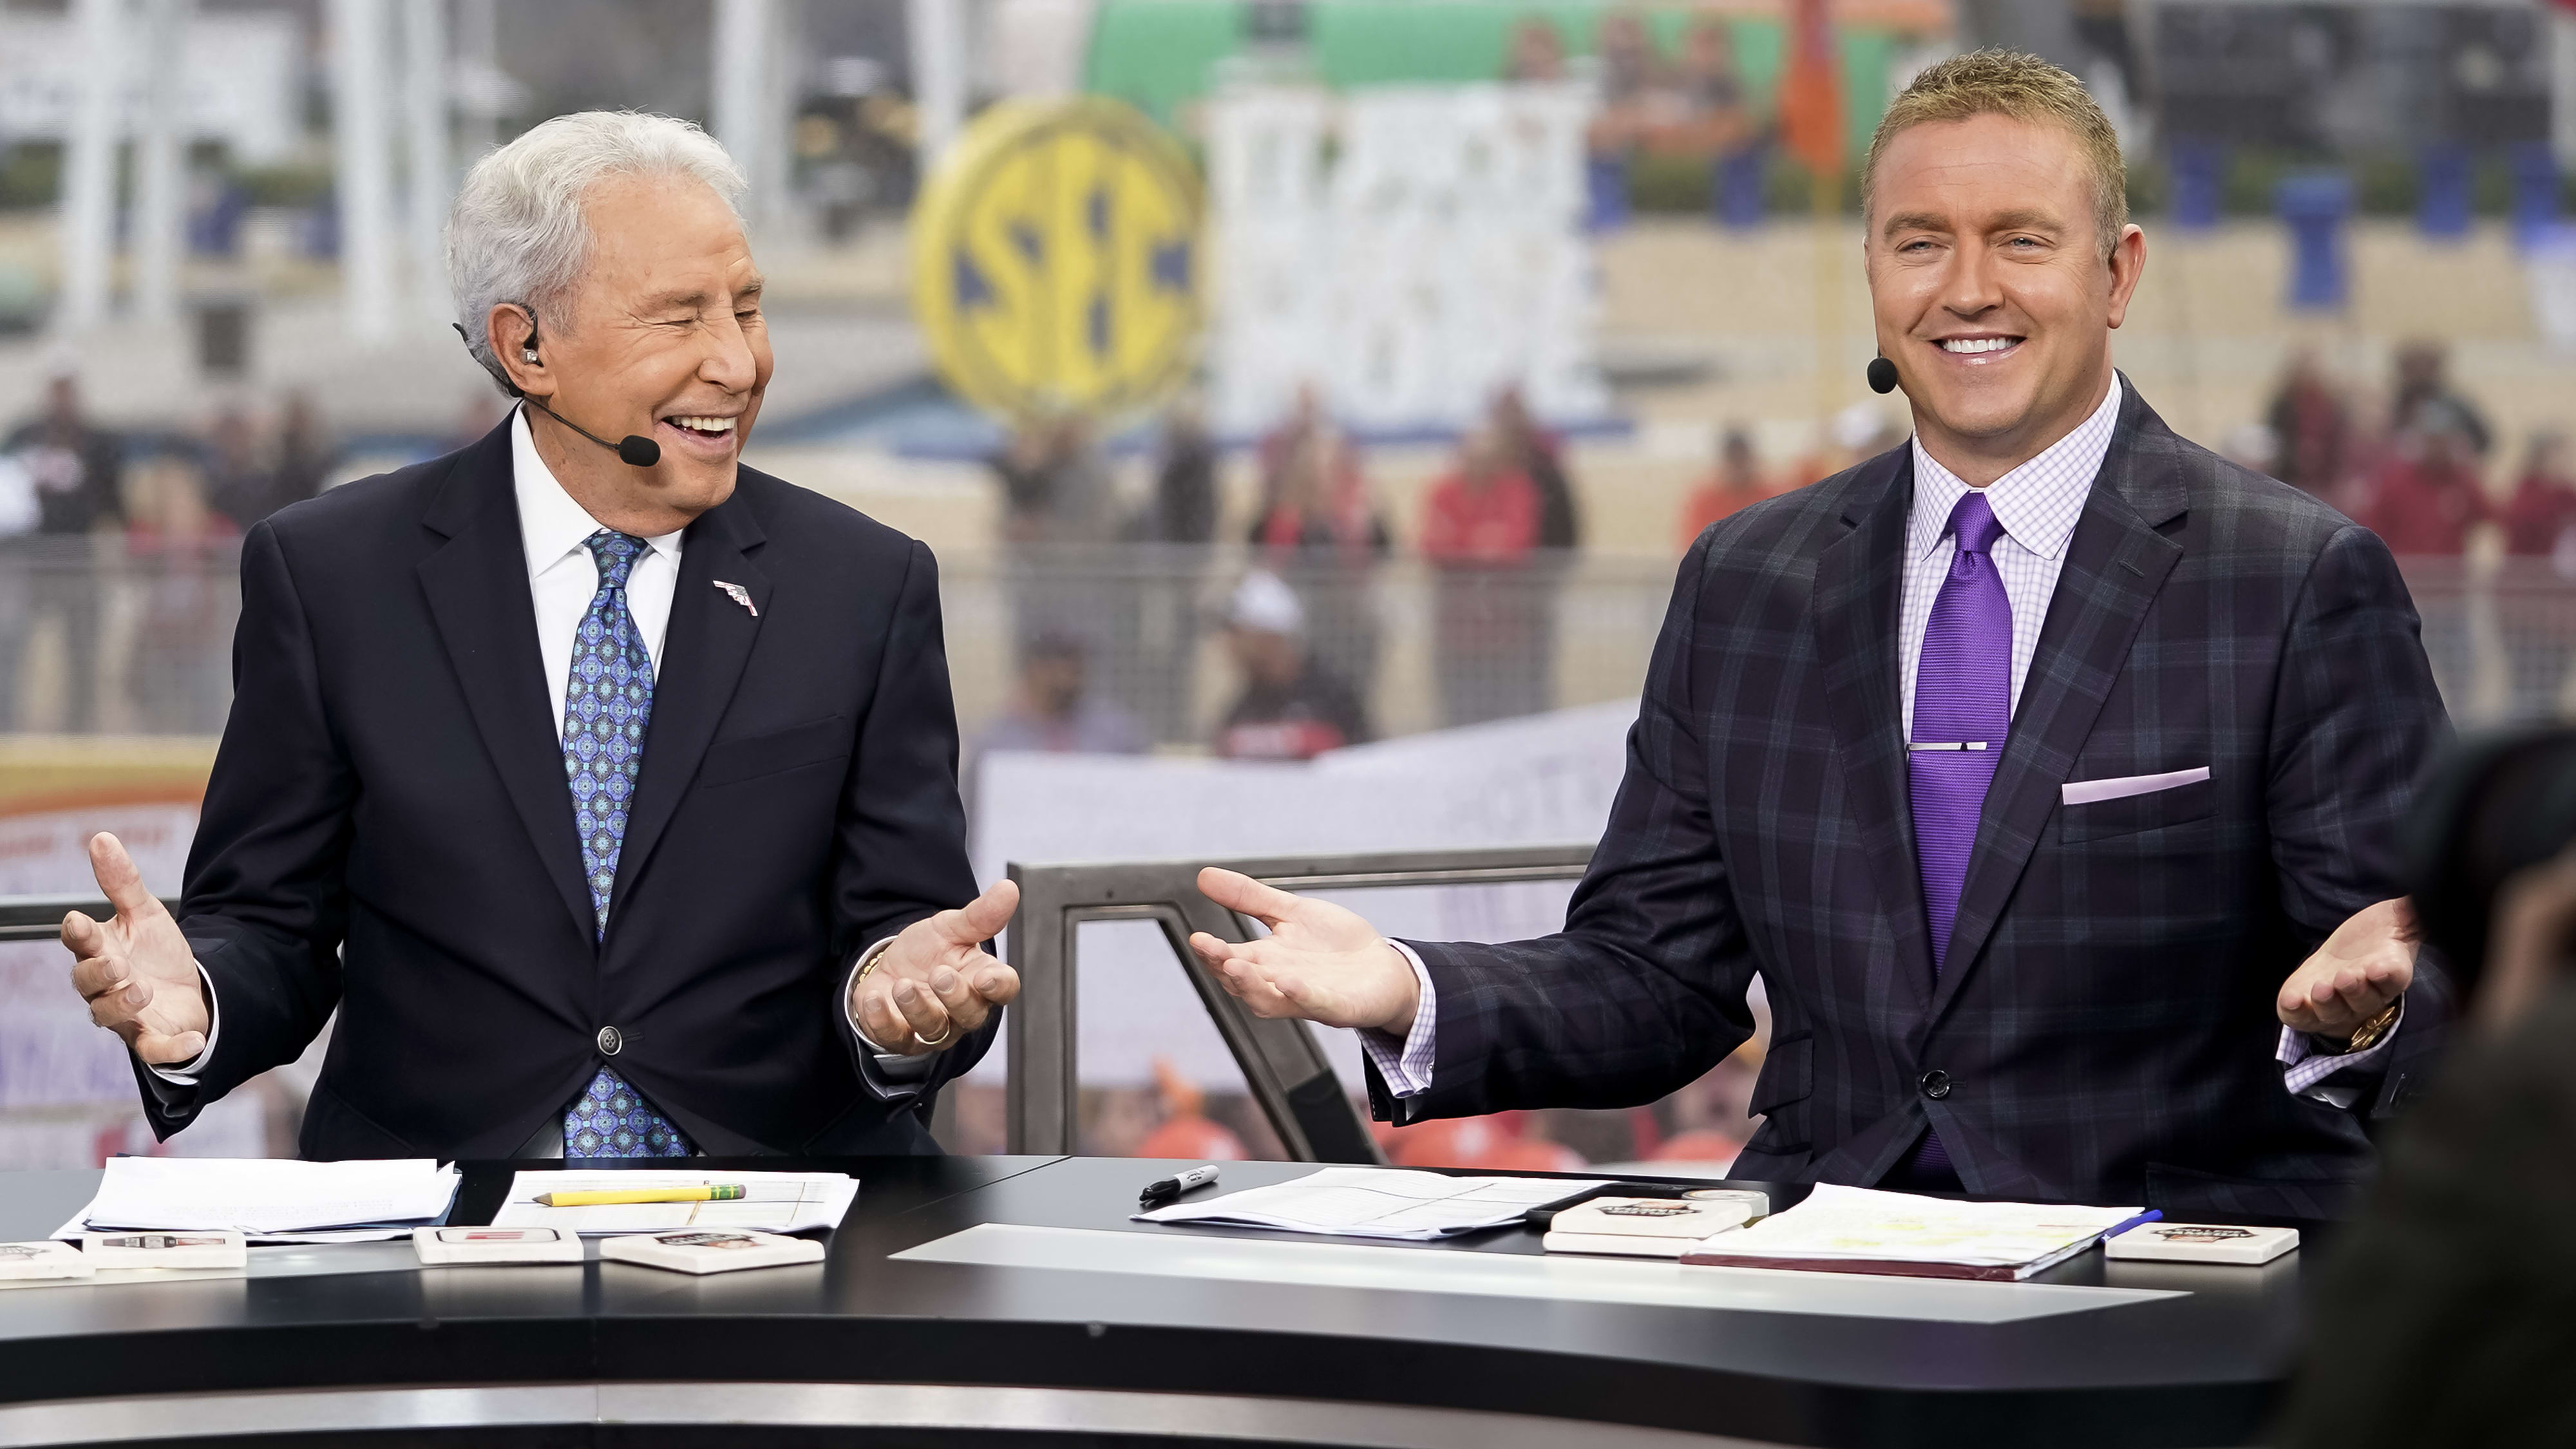 ESPN College GameDay Crew Picks and Predictions for Week 4 With Guest Picker Danica Patrick